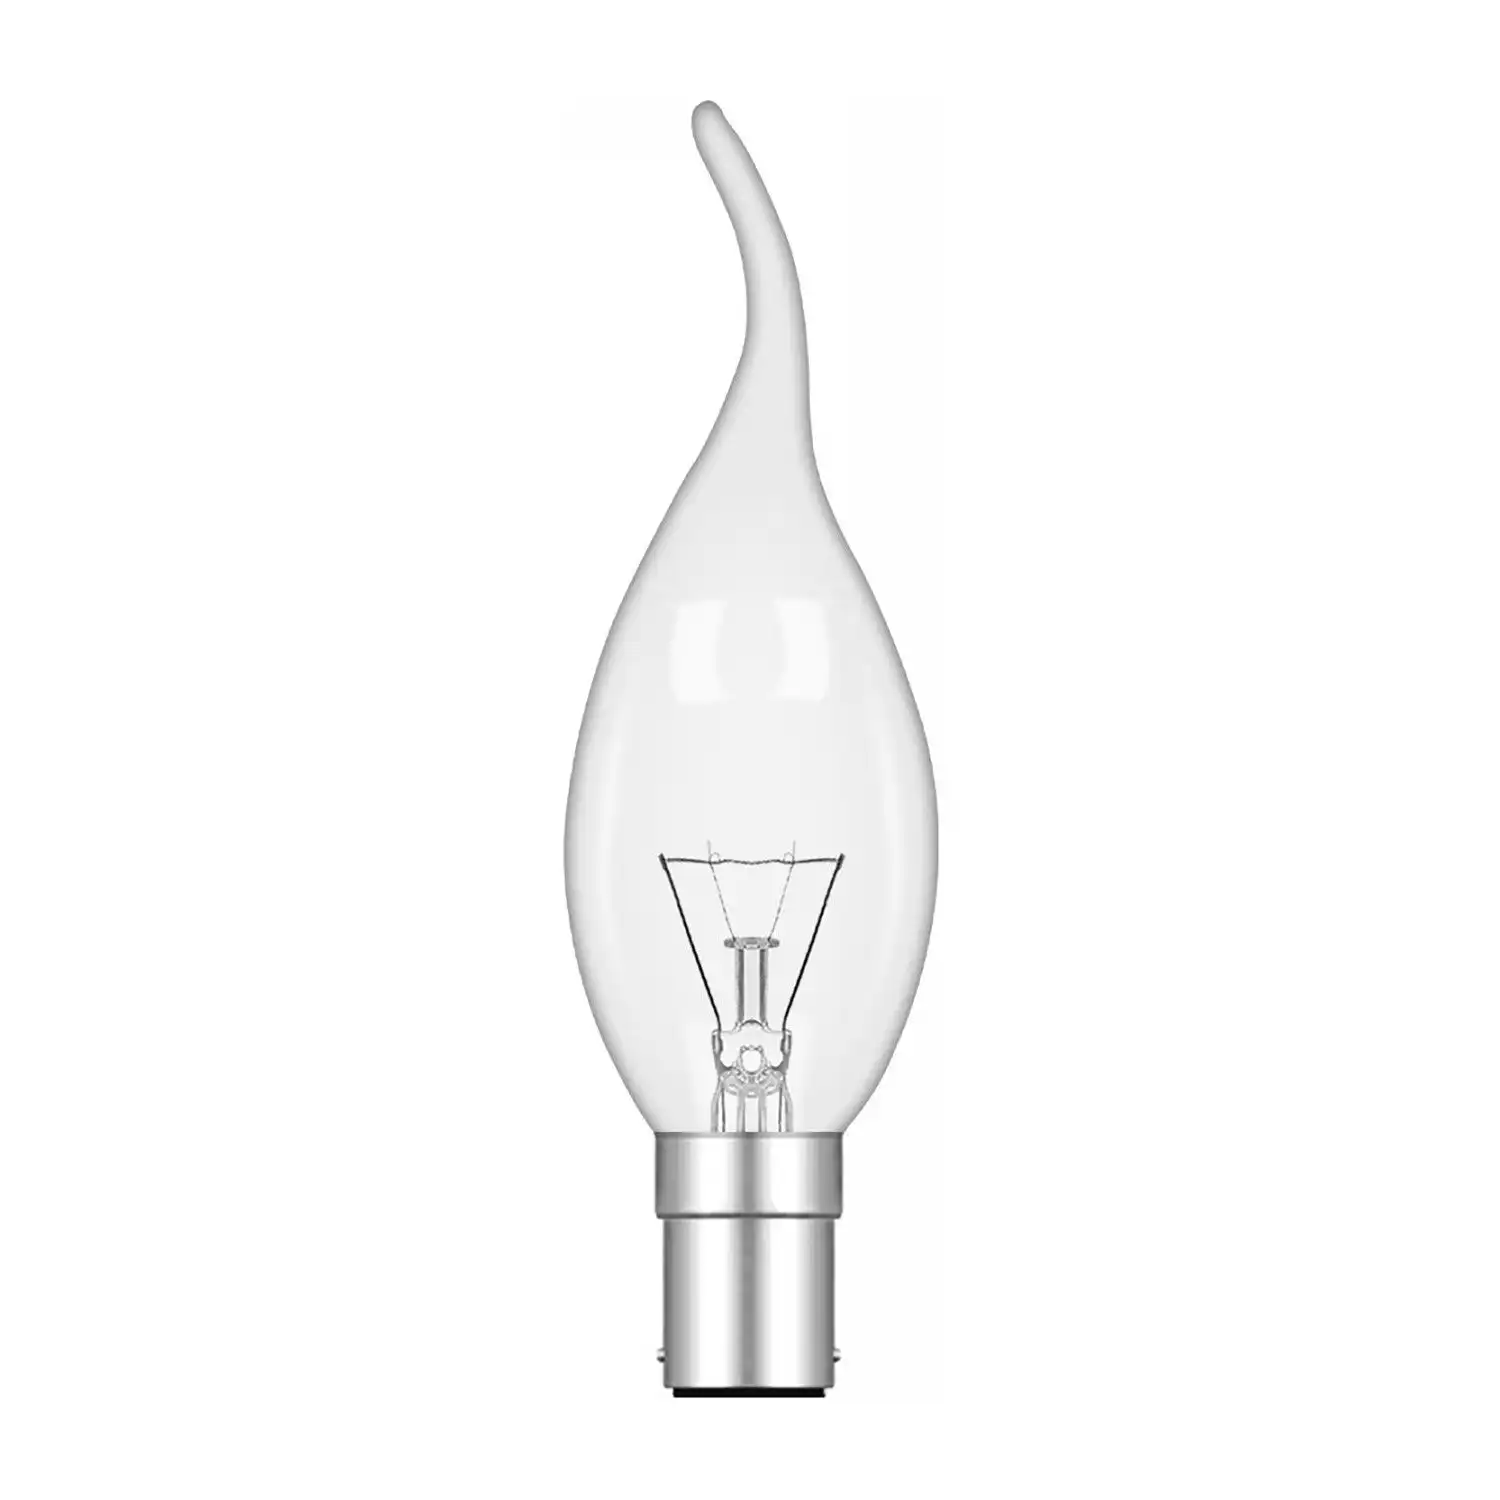 Candle Tip B15D Clear 60W Incandescent T (100 10)